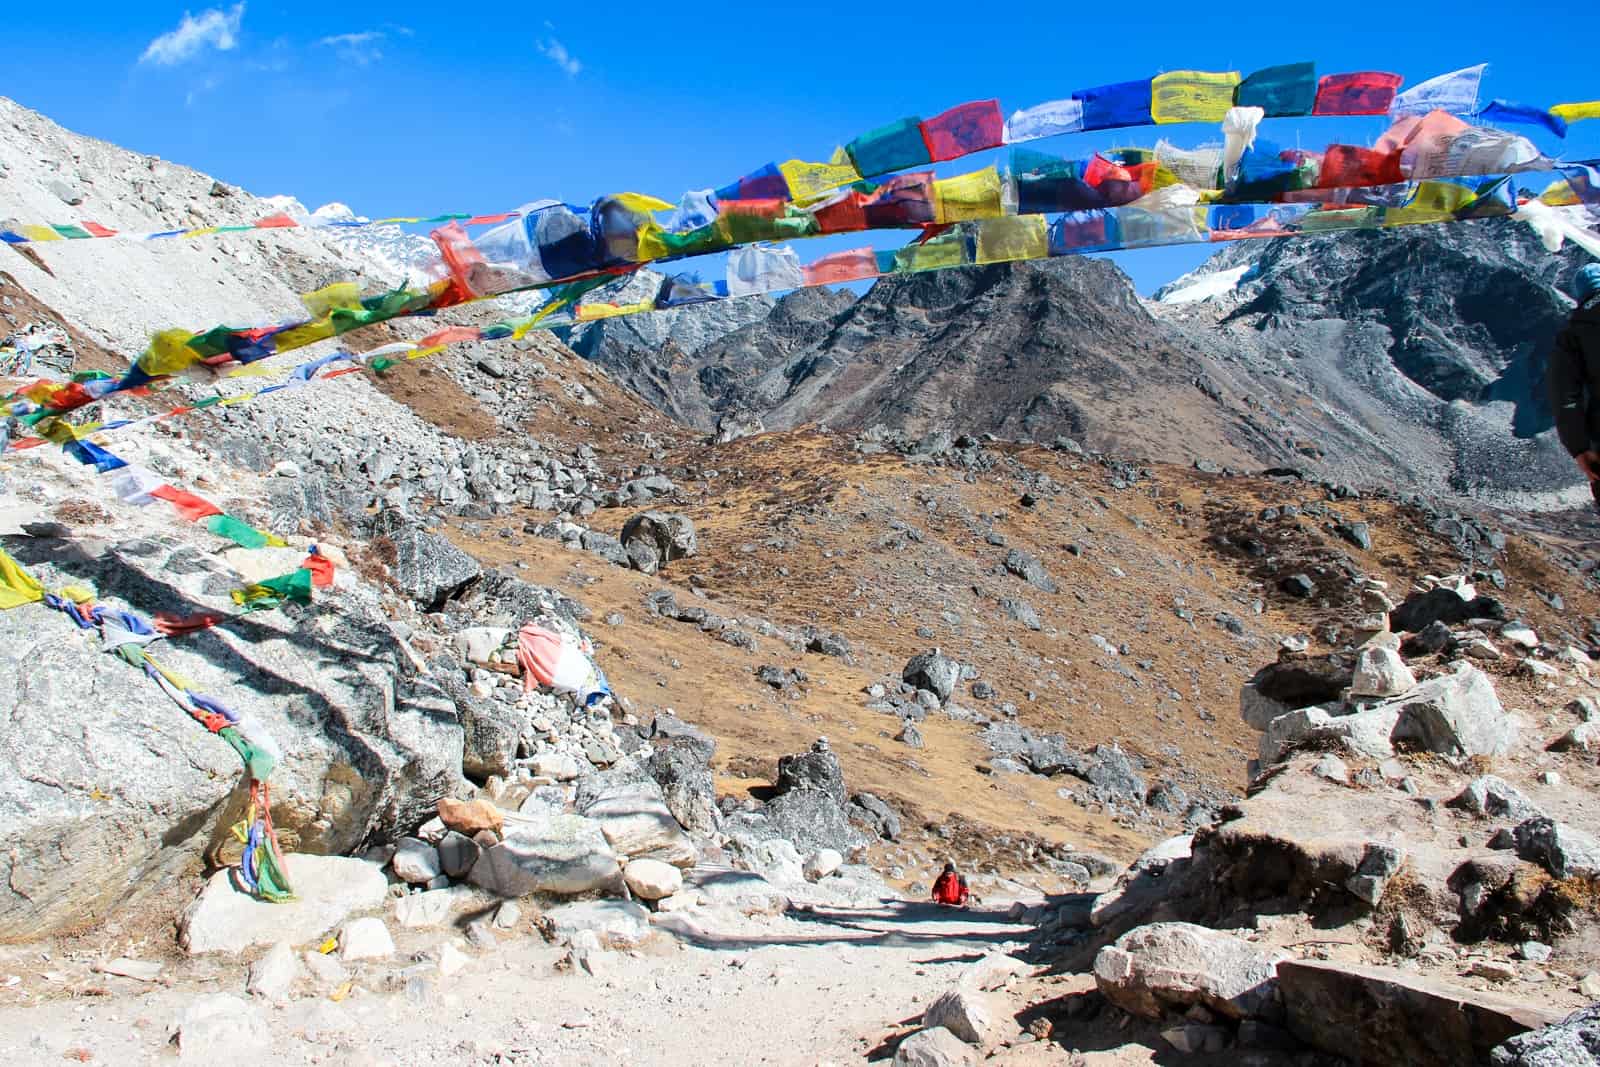 A trekker in a red jacket approaches a dusty path, surrounded by a panorama of sharp mountain peaks. The path is lined with giant rocks and a archway of multicoloured prayer flags hangs overhead. 